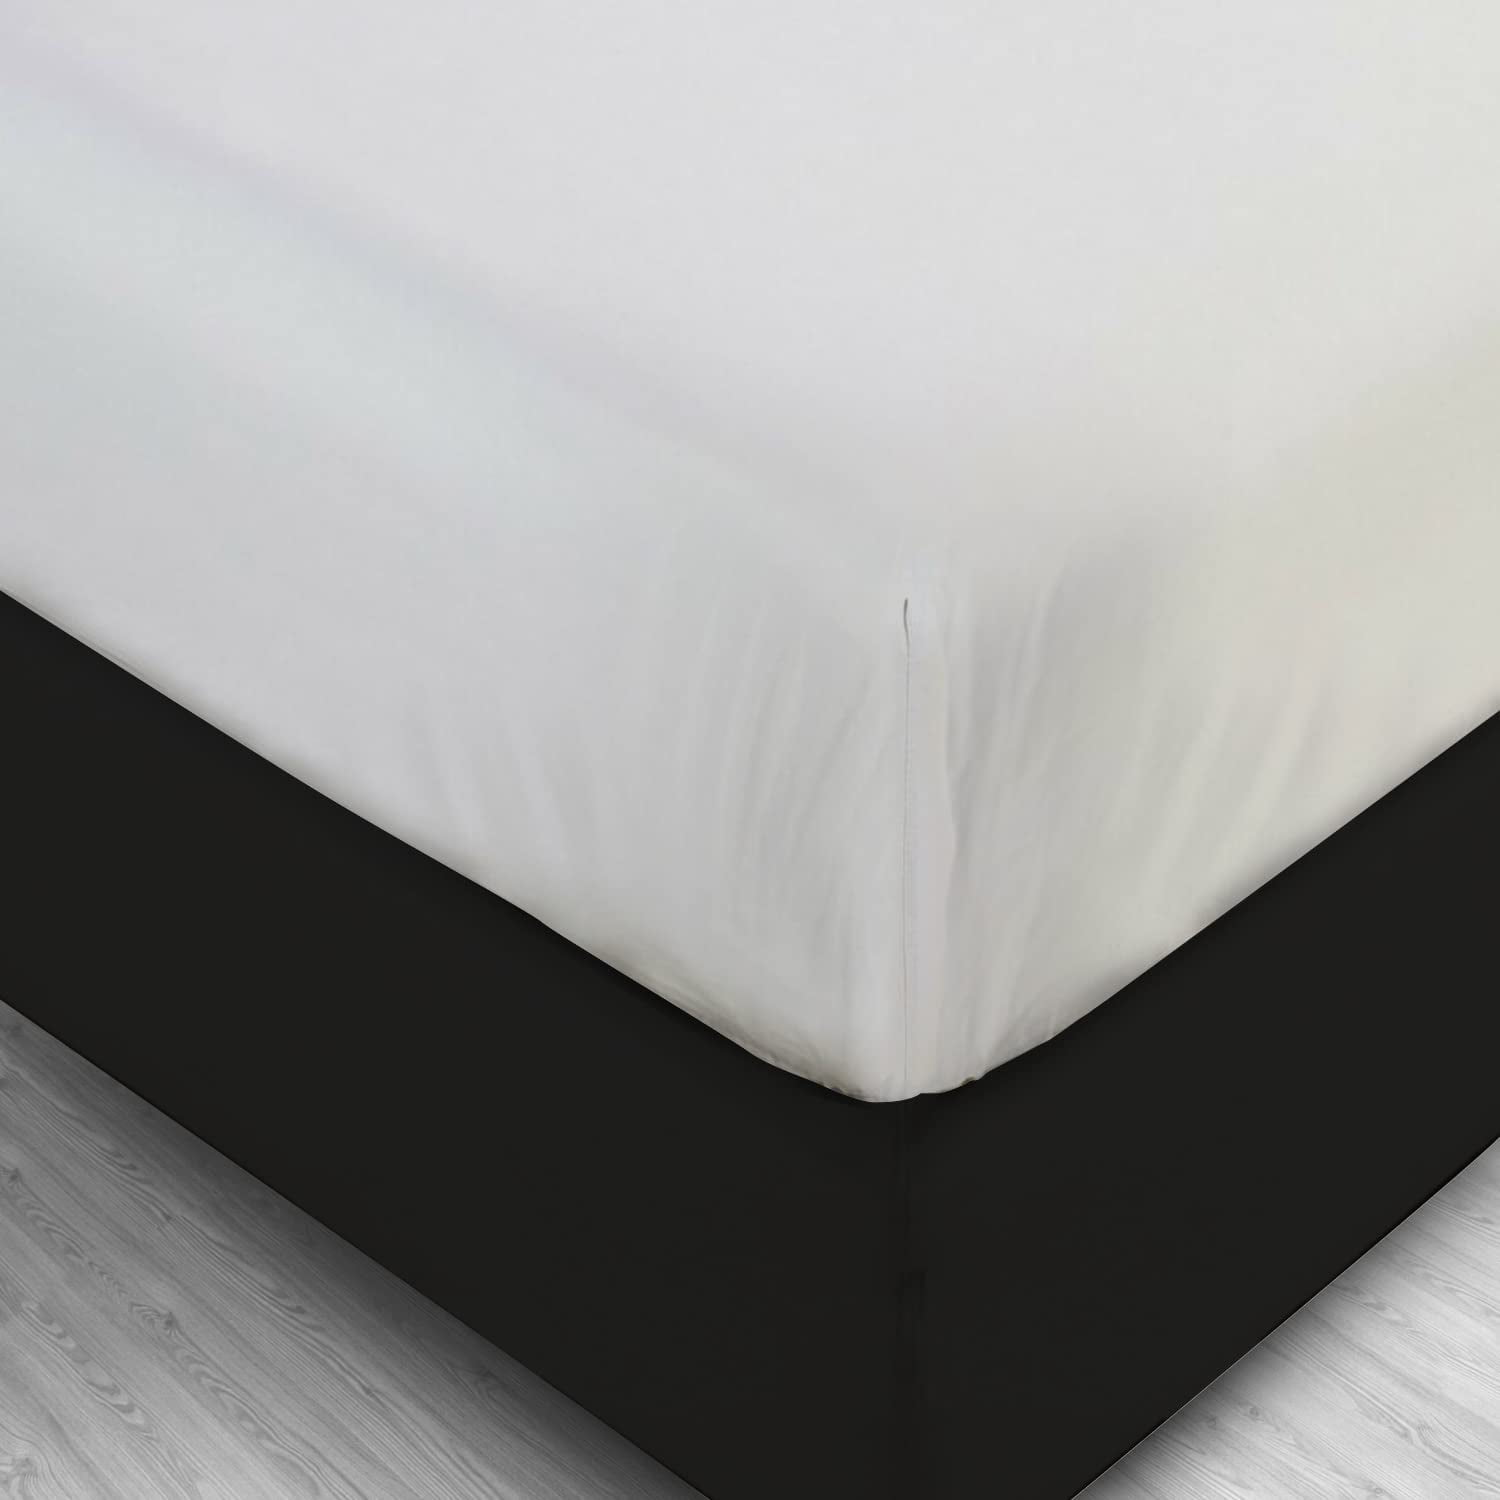 WATERPROOF KING SIZE MATTRESS PROTECTOR COVER FITTED PLASTIC SHEET INCONTINENCE 